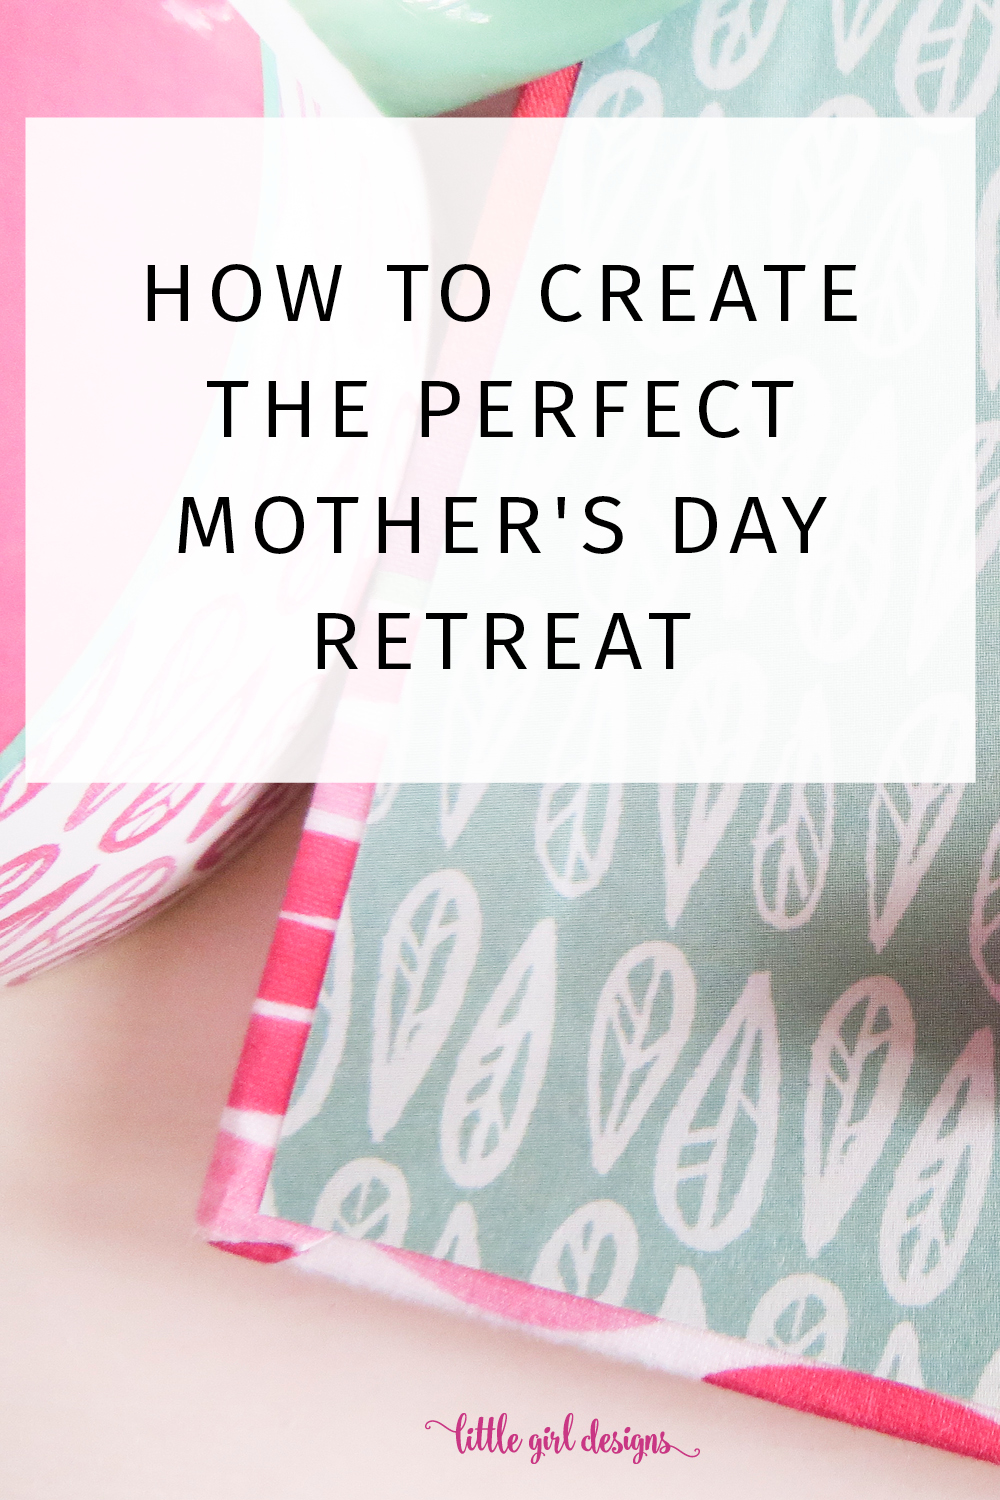 This was what I needed to hear! I've been waiting to go on a retreat when this post helped me realize I could just start making them NOW. Also, I LOVE the journal in this post!